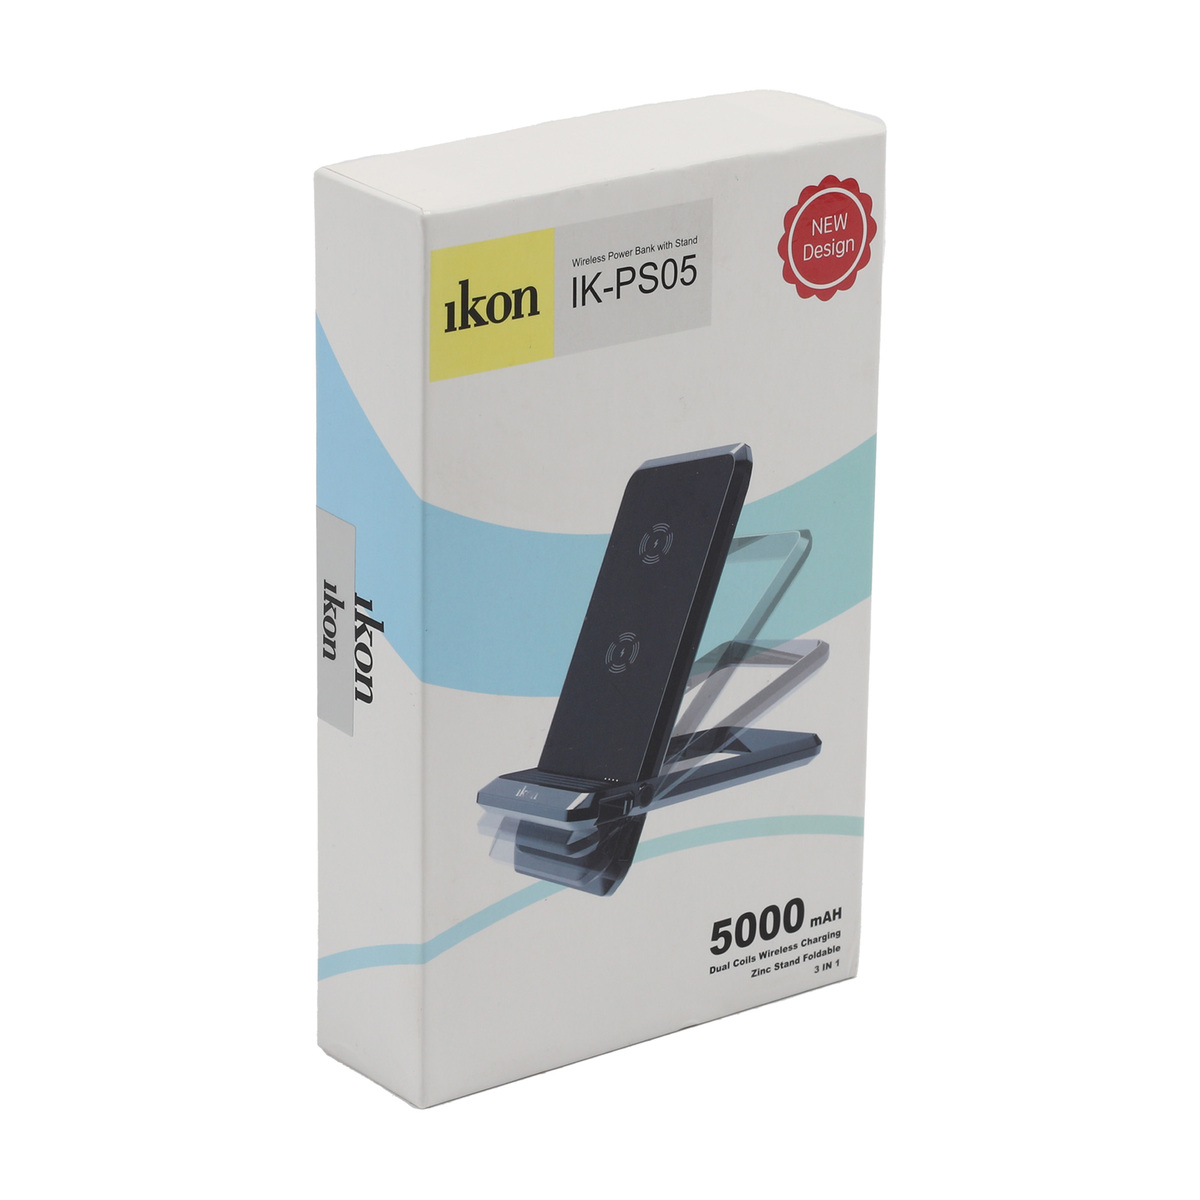 Ikon Wireless Power Bank With Stand IK-PS05 5000mAh